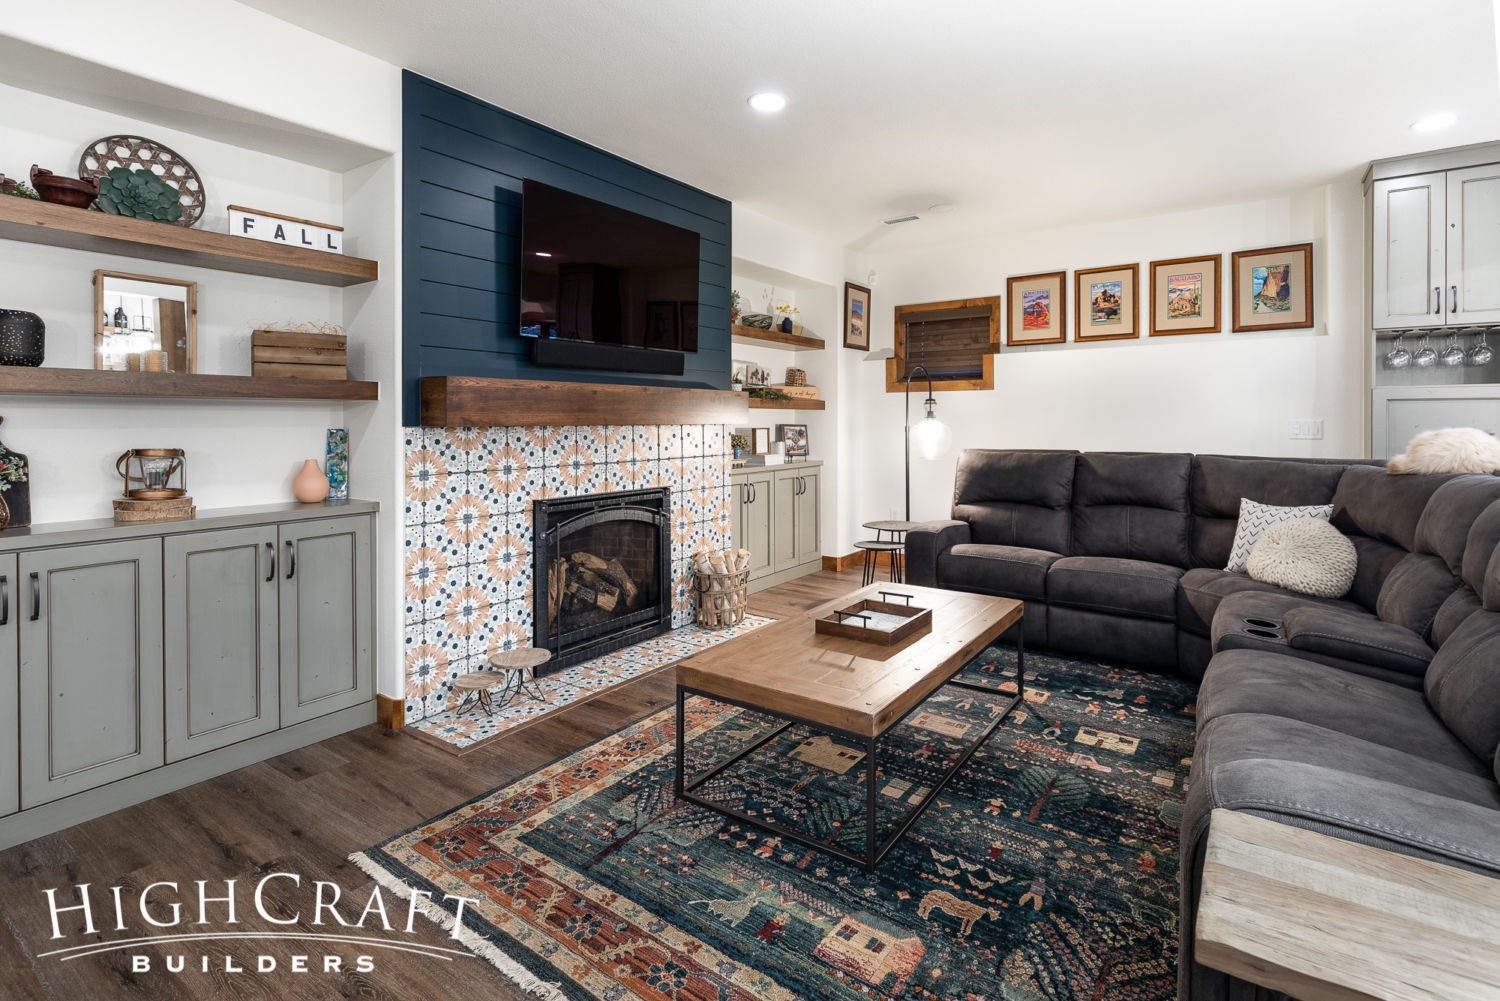 basement-remodeling-contractor-great-room-living-room-fireplace-shelving-built-in-cabinets